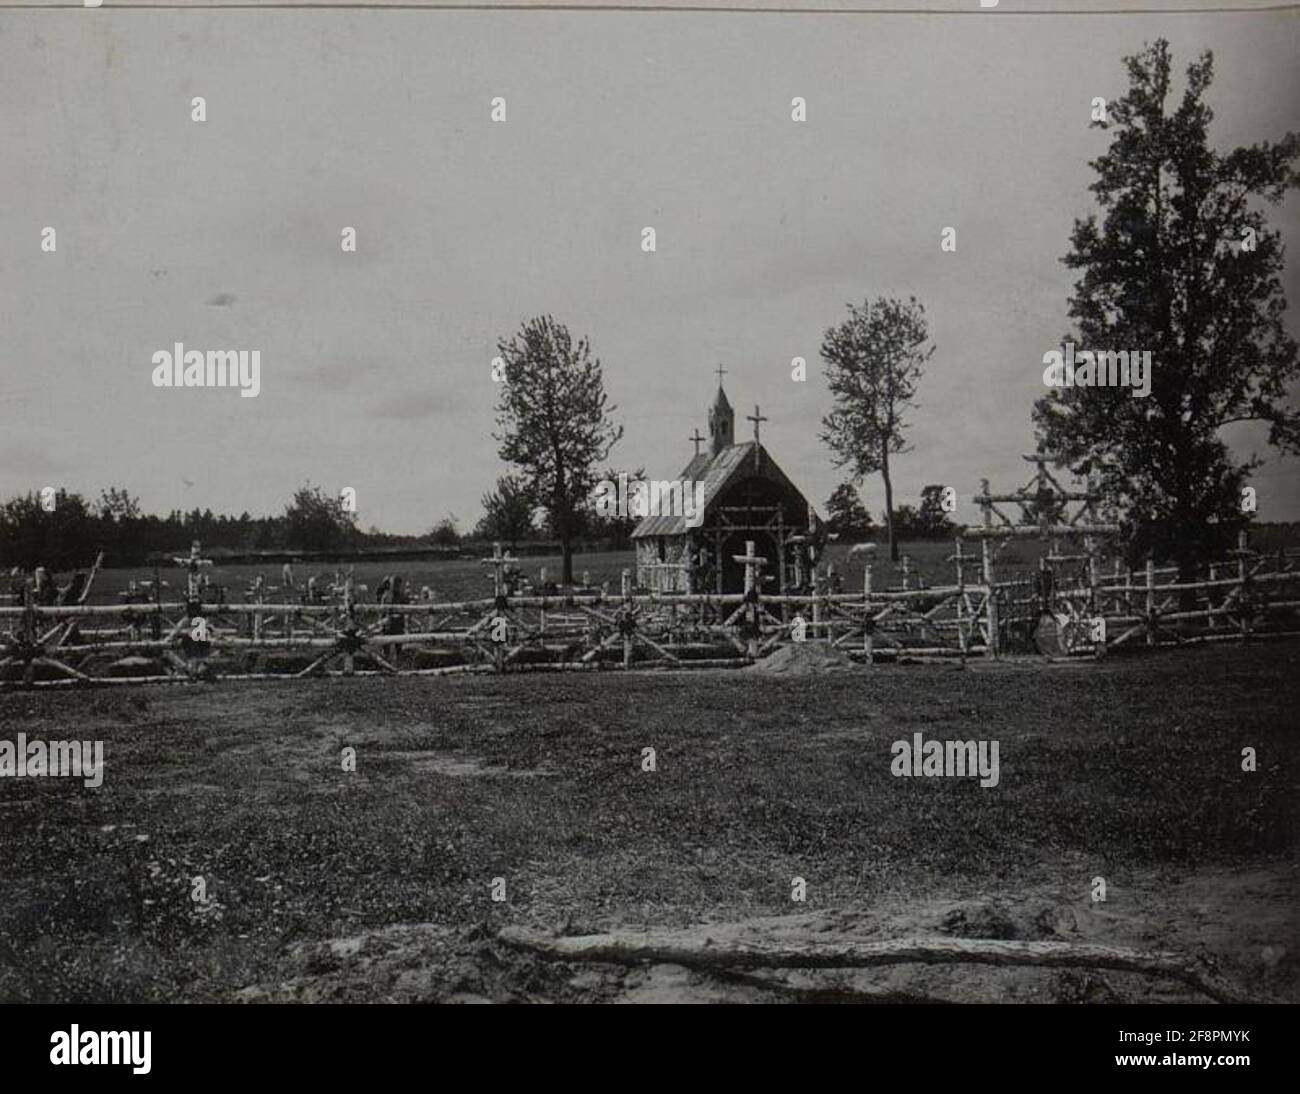 Cemetery of the 2nd infantry division. Stock Photo